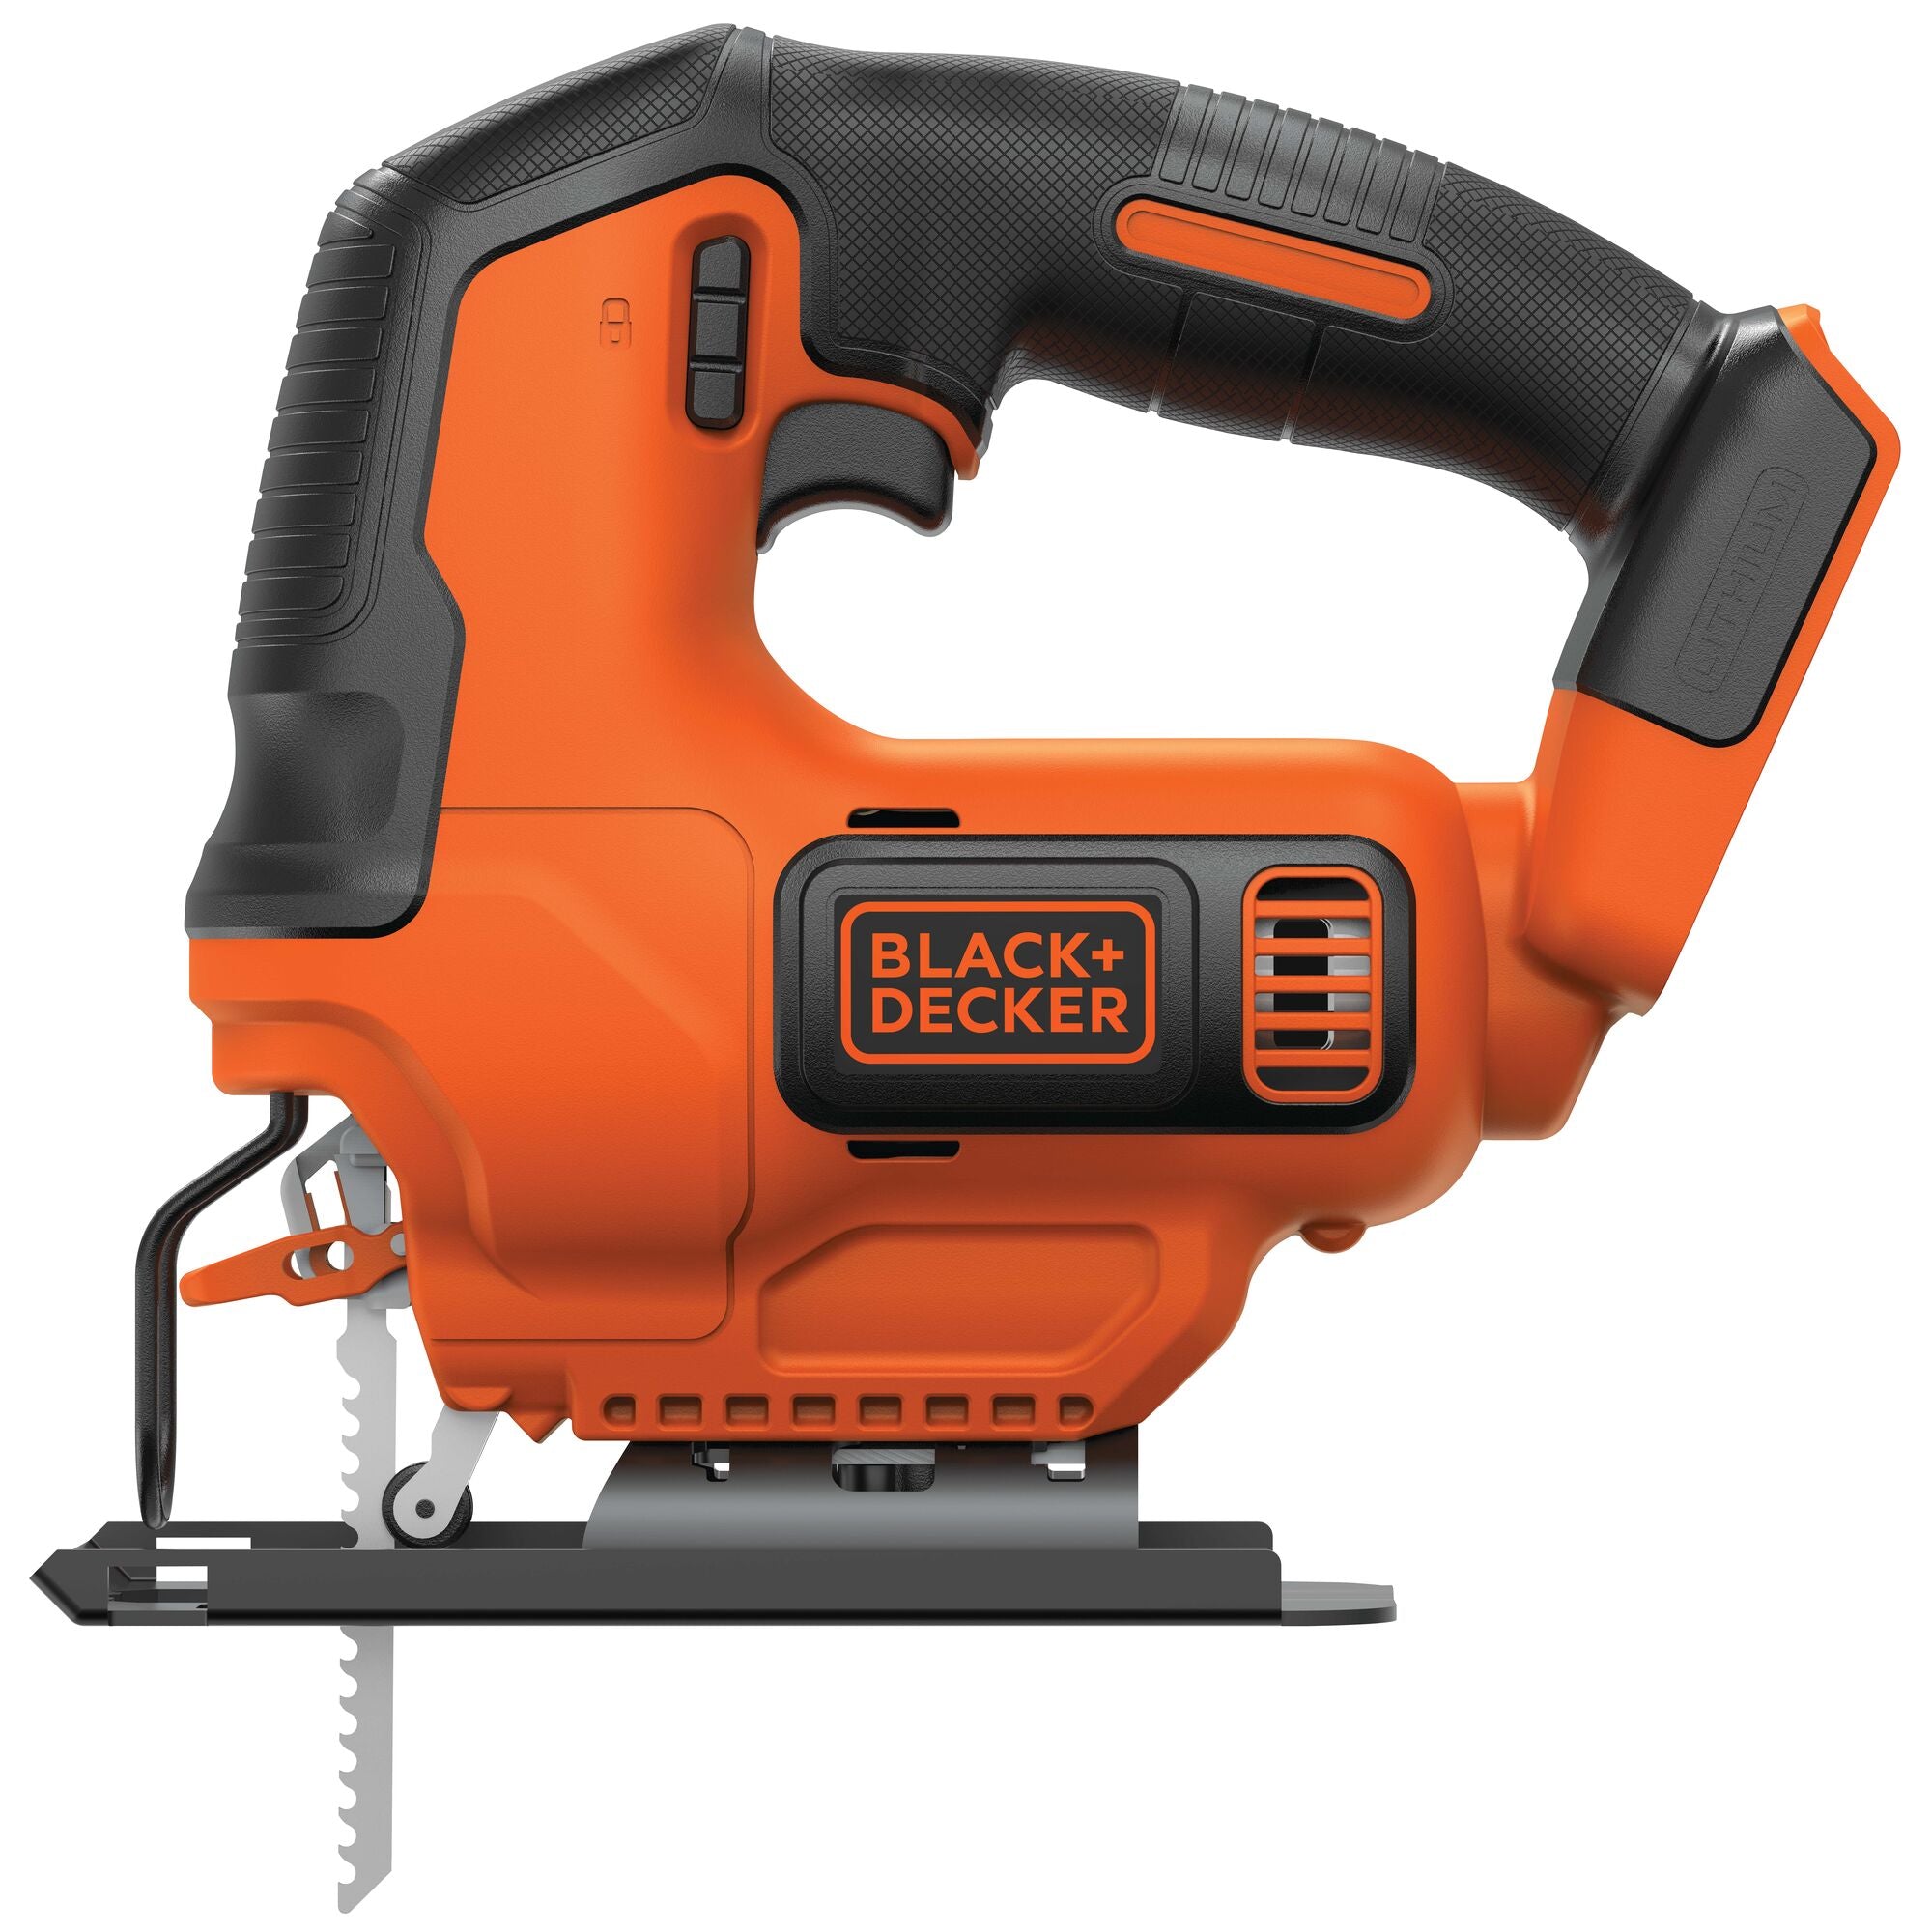 BLACK & DECKER VP660 Type 1 Cordless Jig Saw, Tool Only- New Open Box  Missing pc